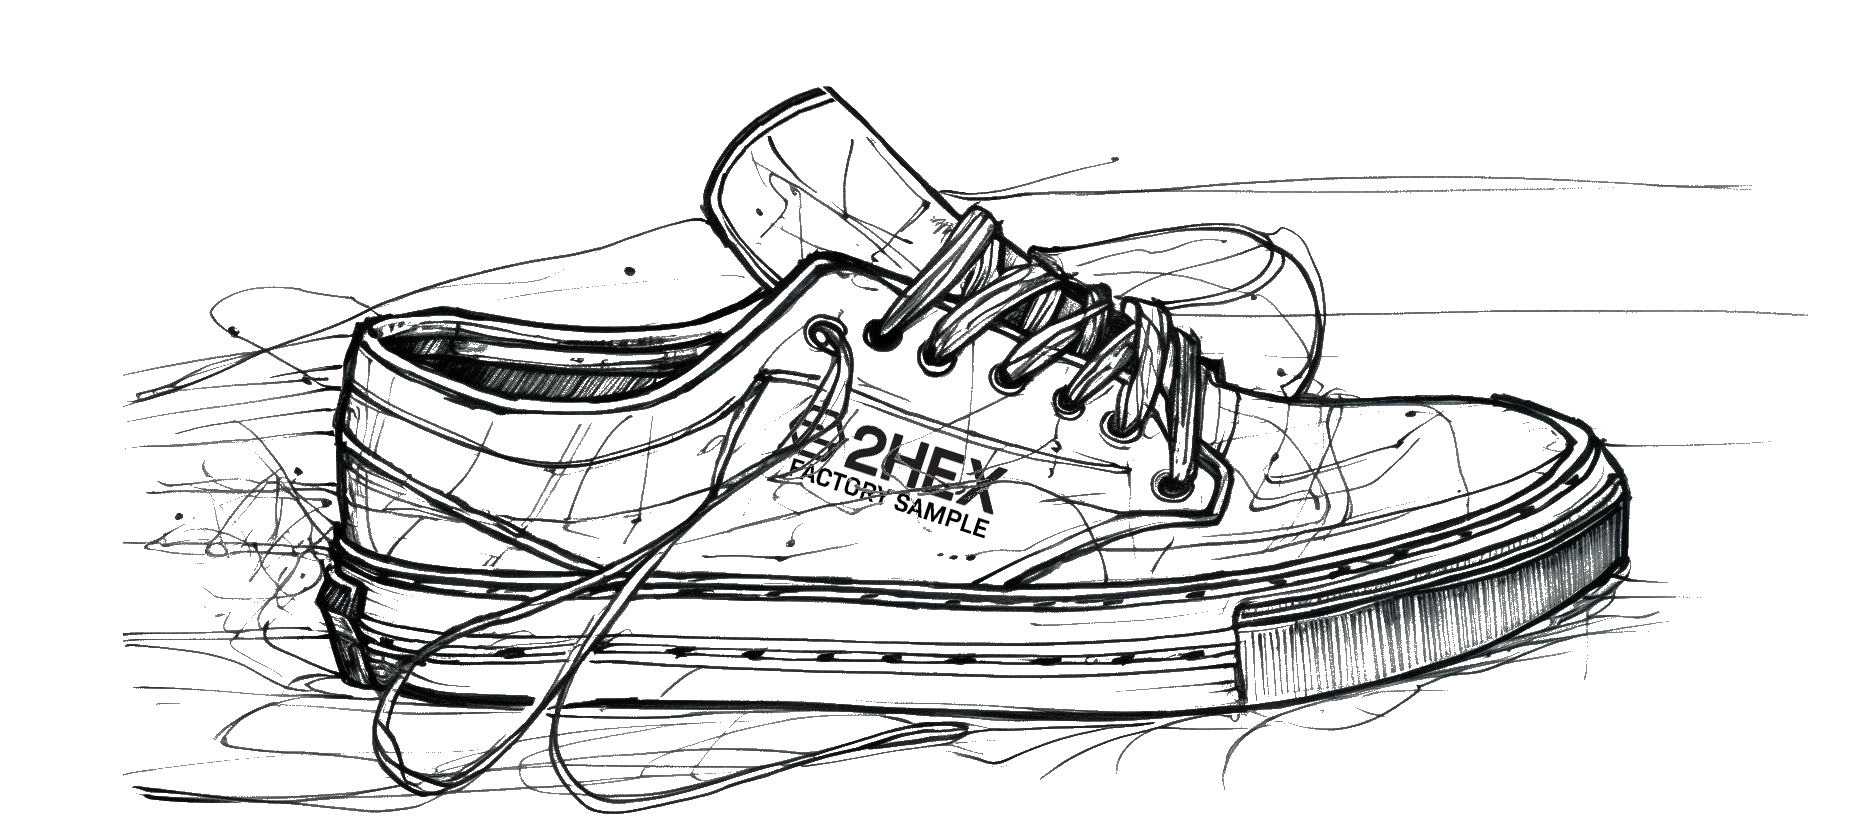 Drawing of skate shoes for 2HEX skate shoes factory.